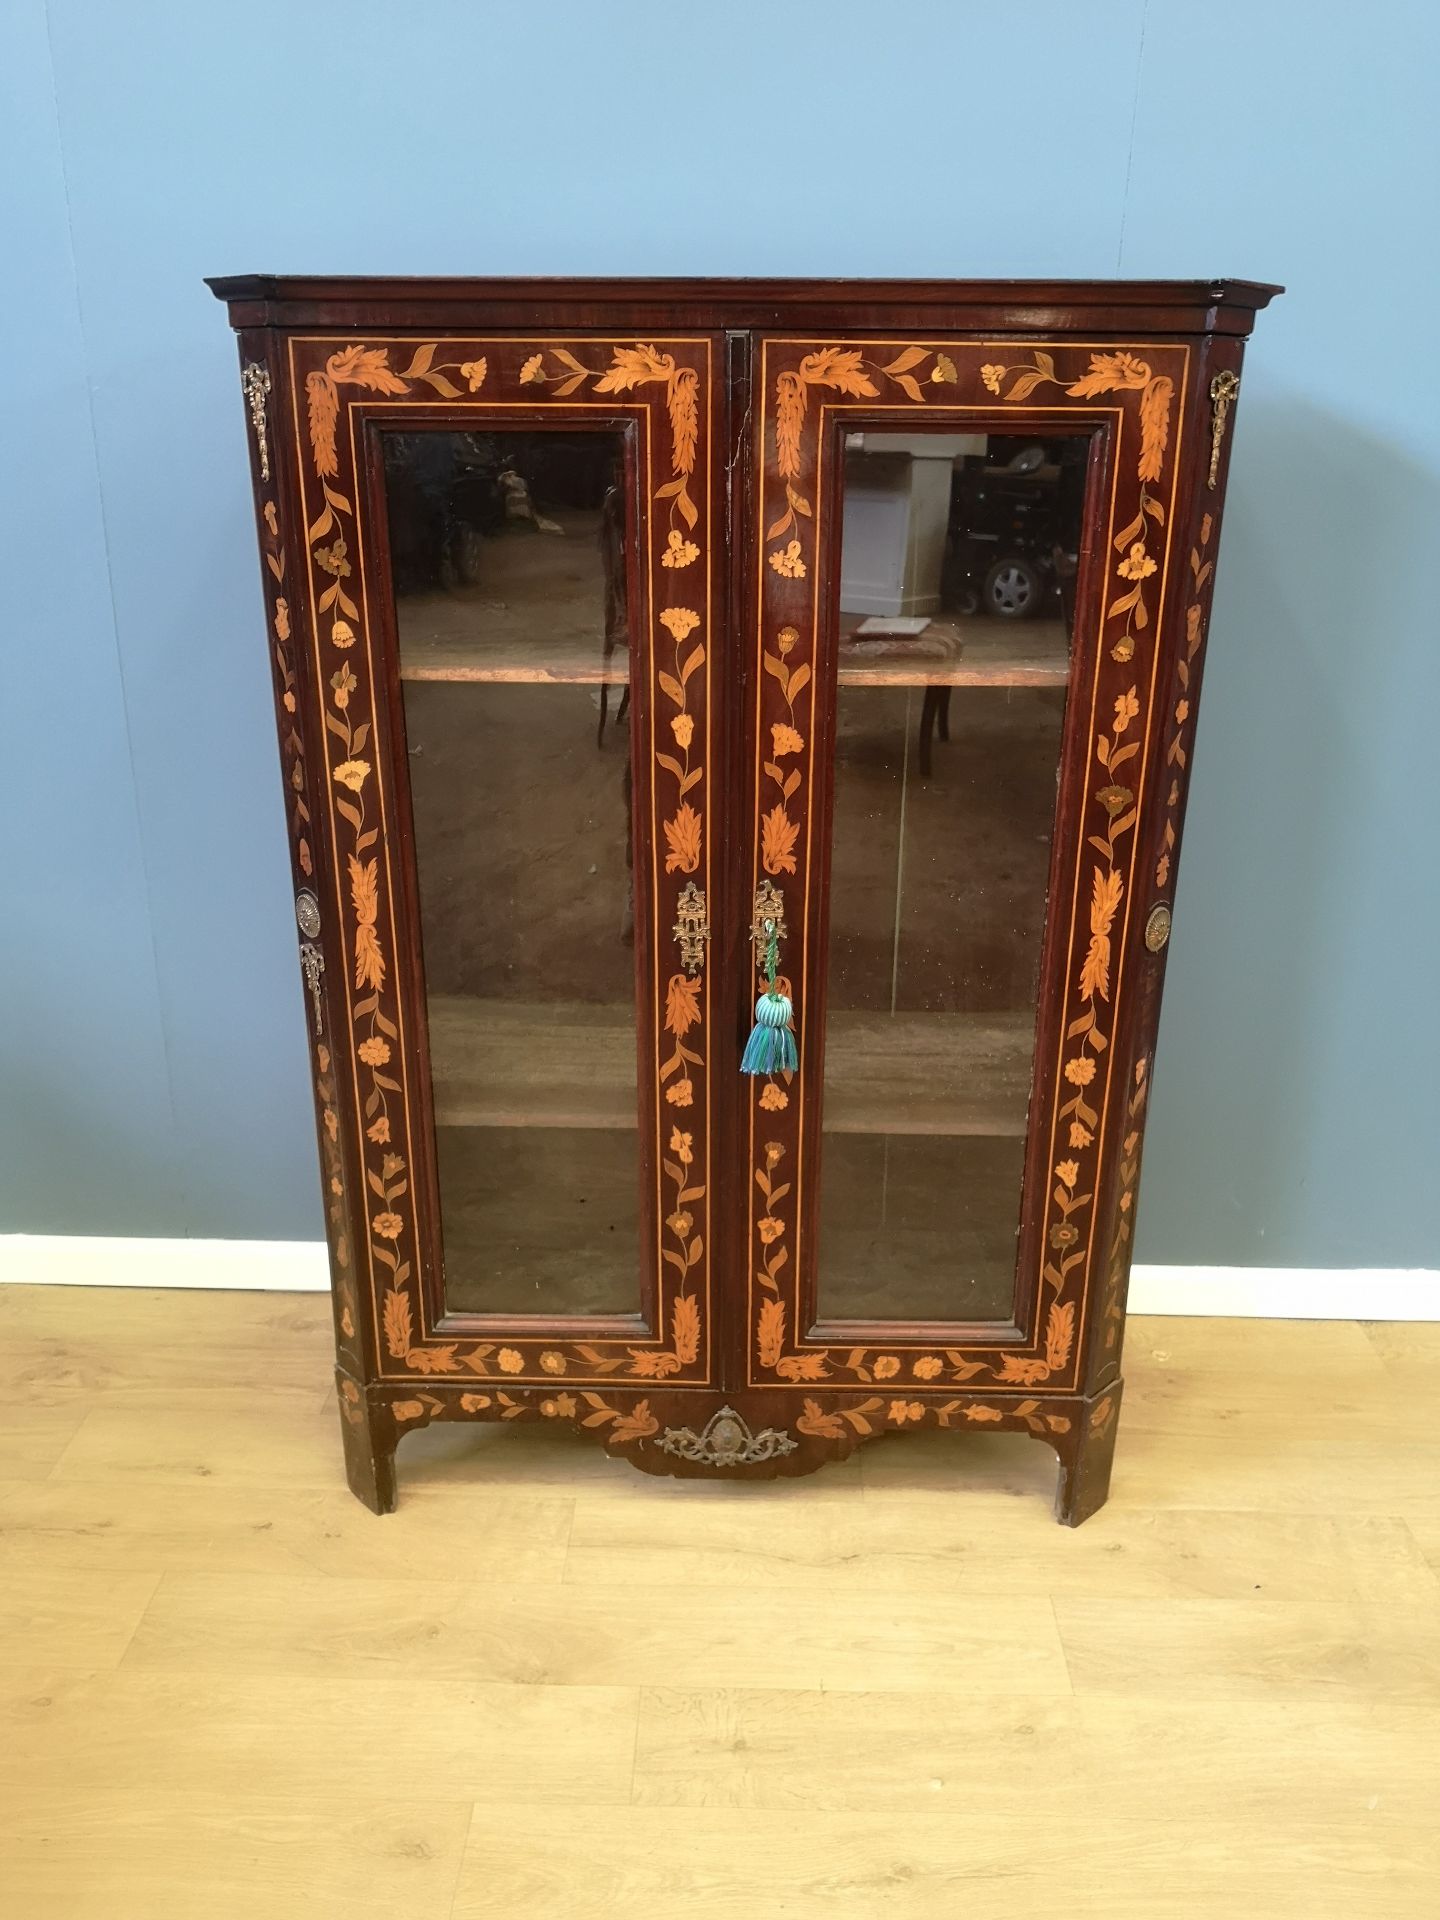 Mahogany glass fronted bookcase